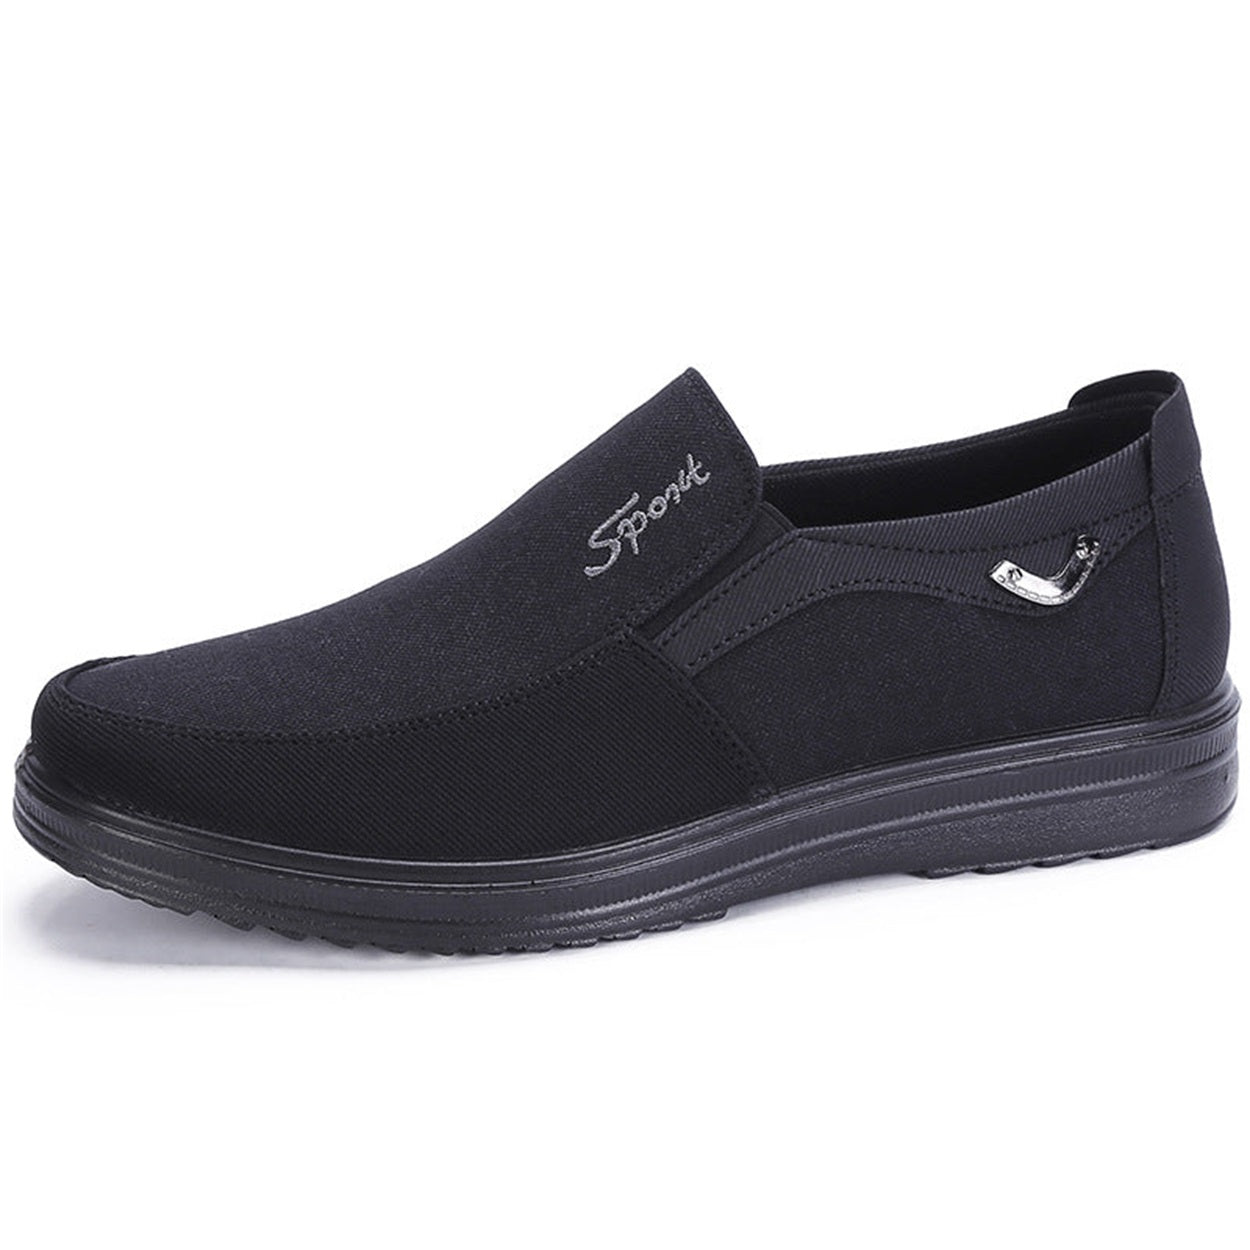 sursell canvas orthotie sneakers272d7